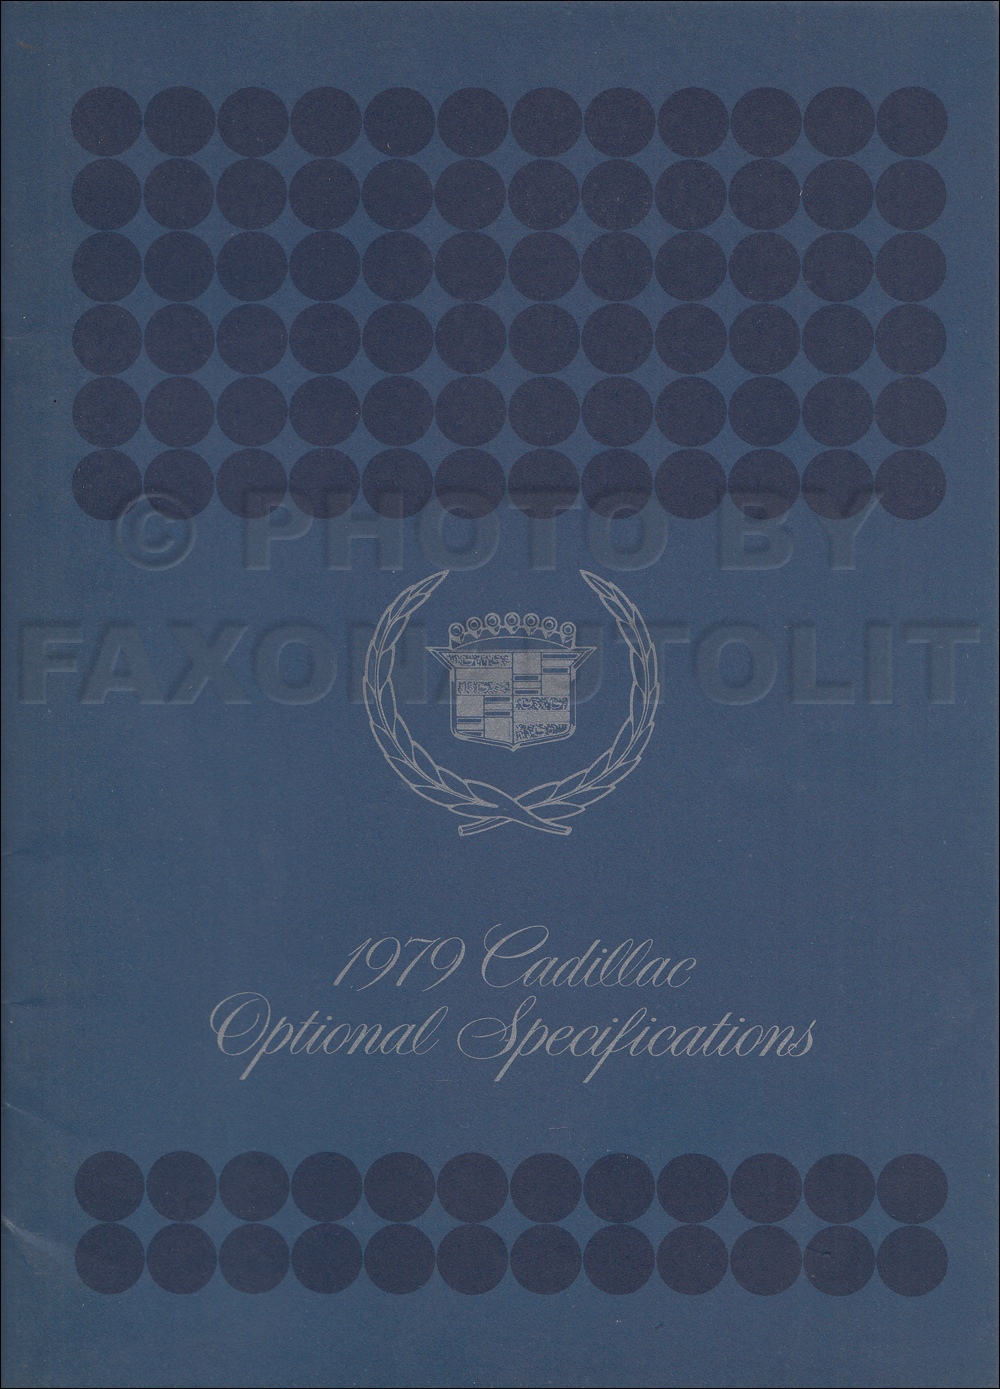 1979 Cadillac Optional Specifications Book Original